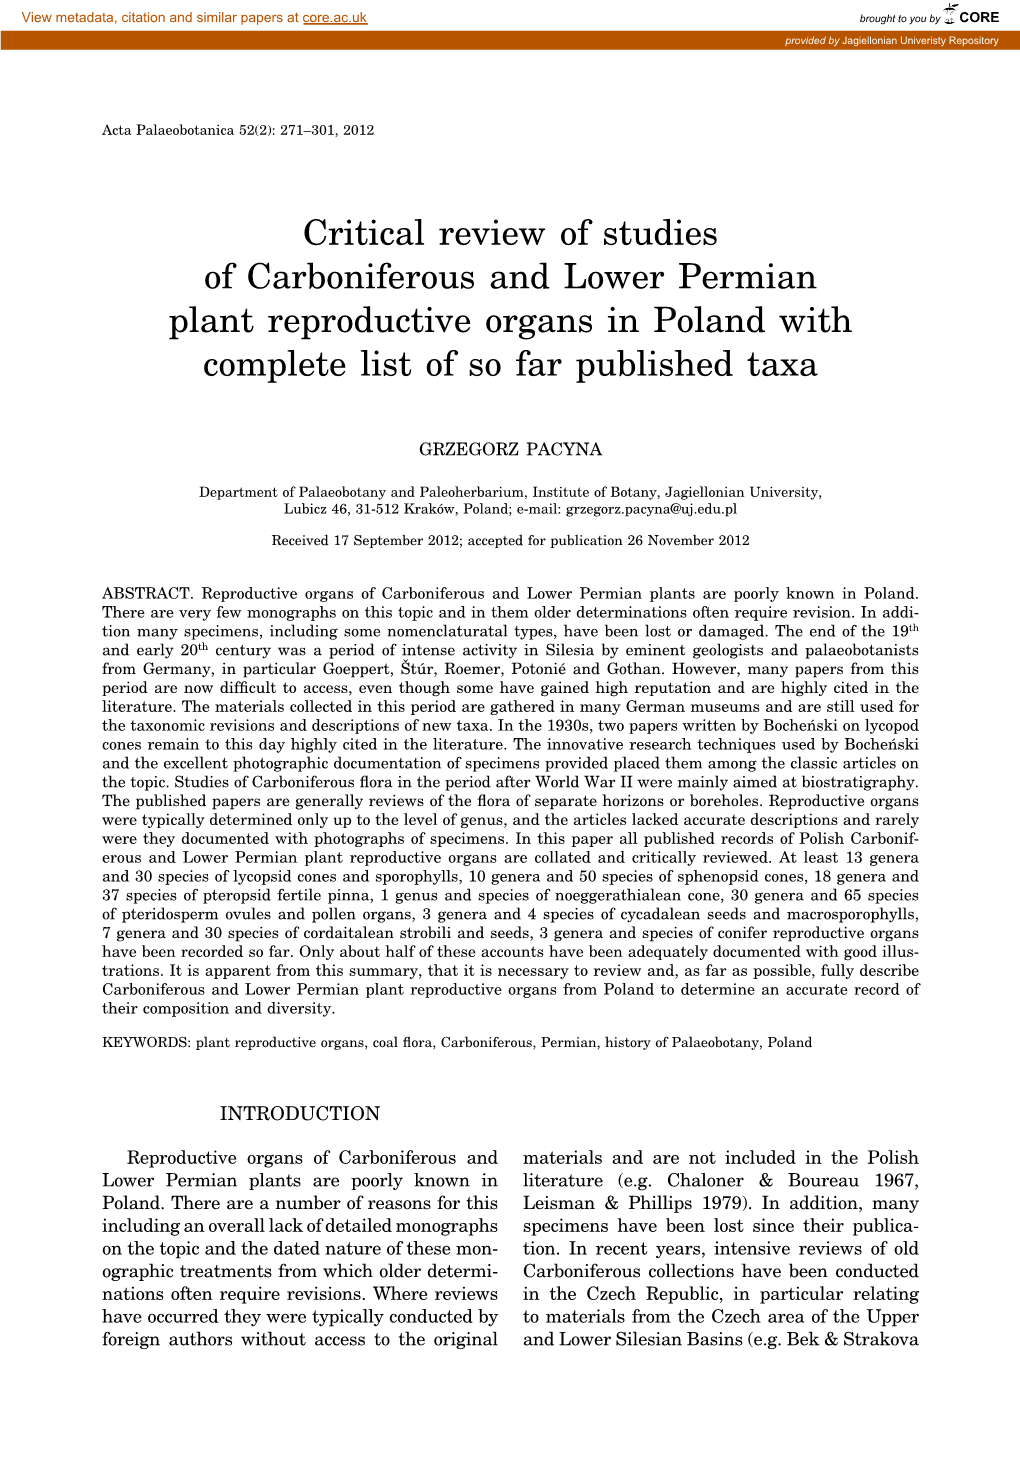 Critical Review of Studies of Carboniferous and Lower Permian Plant Reproductive Organs in Poland with Complete List of So Far Published Taxa